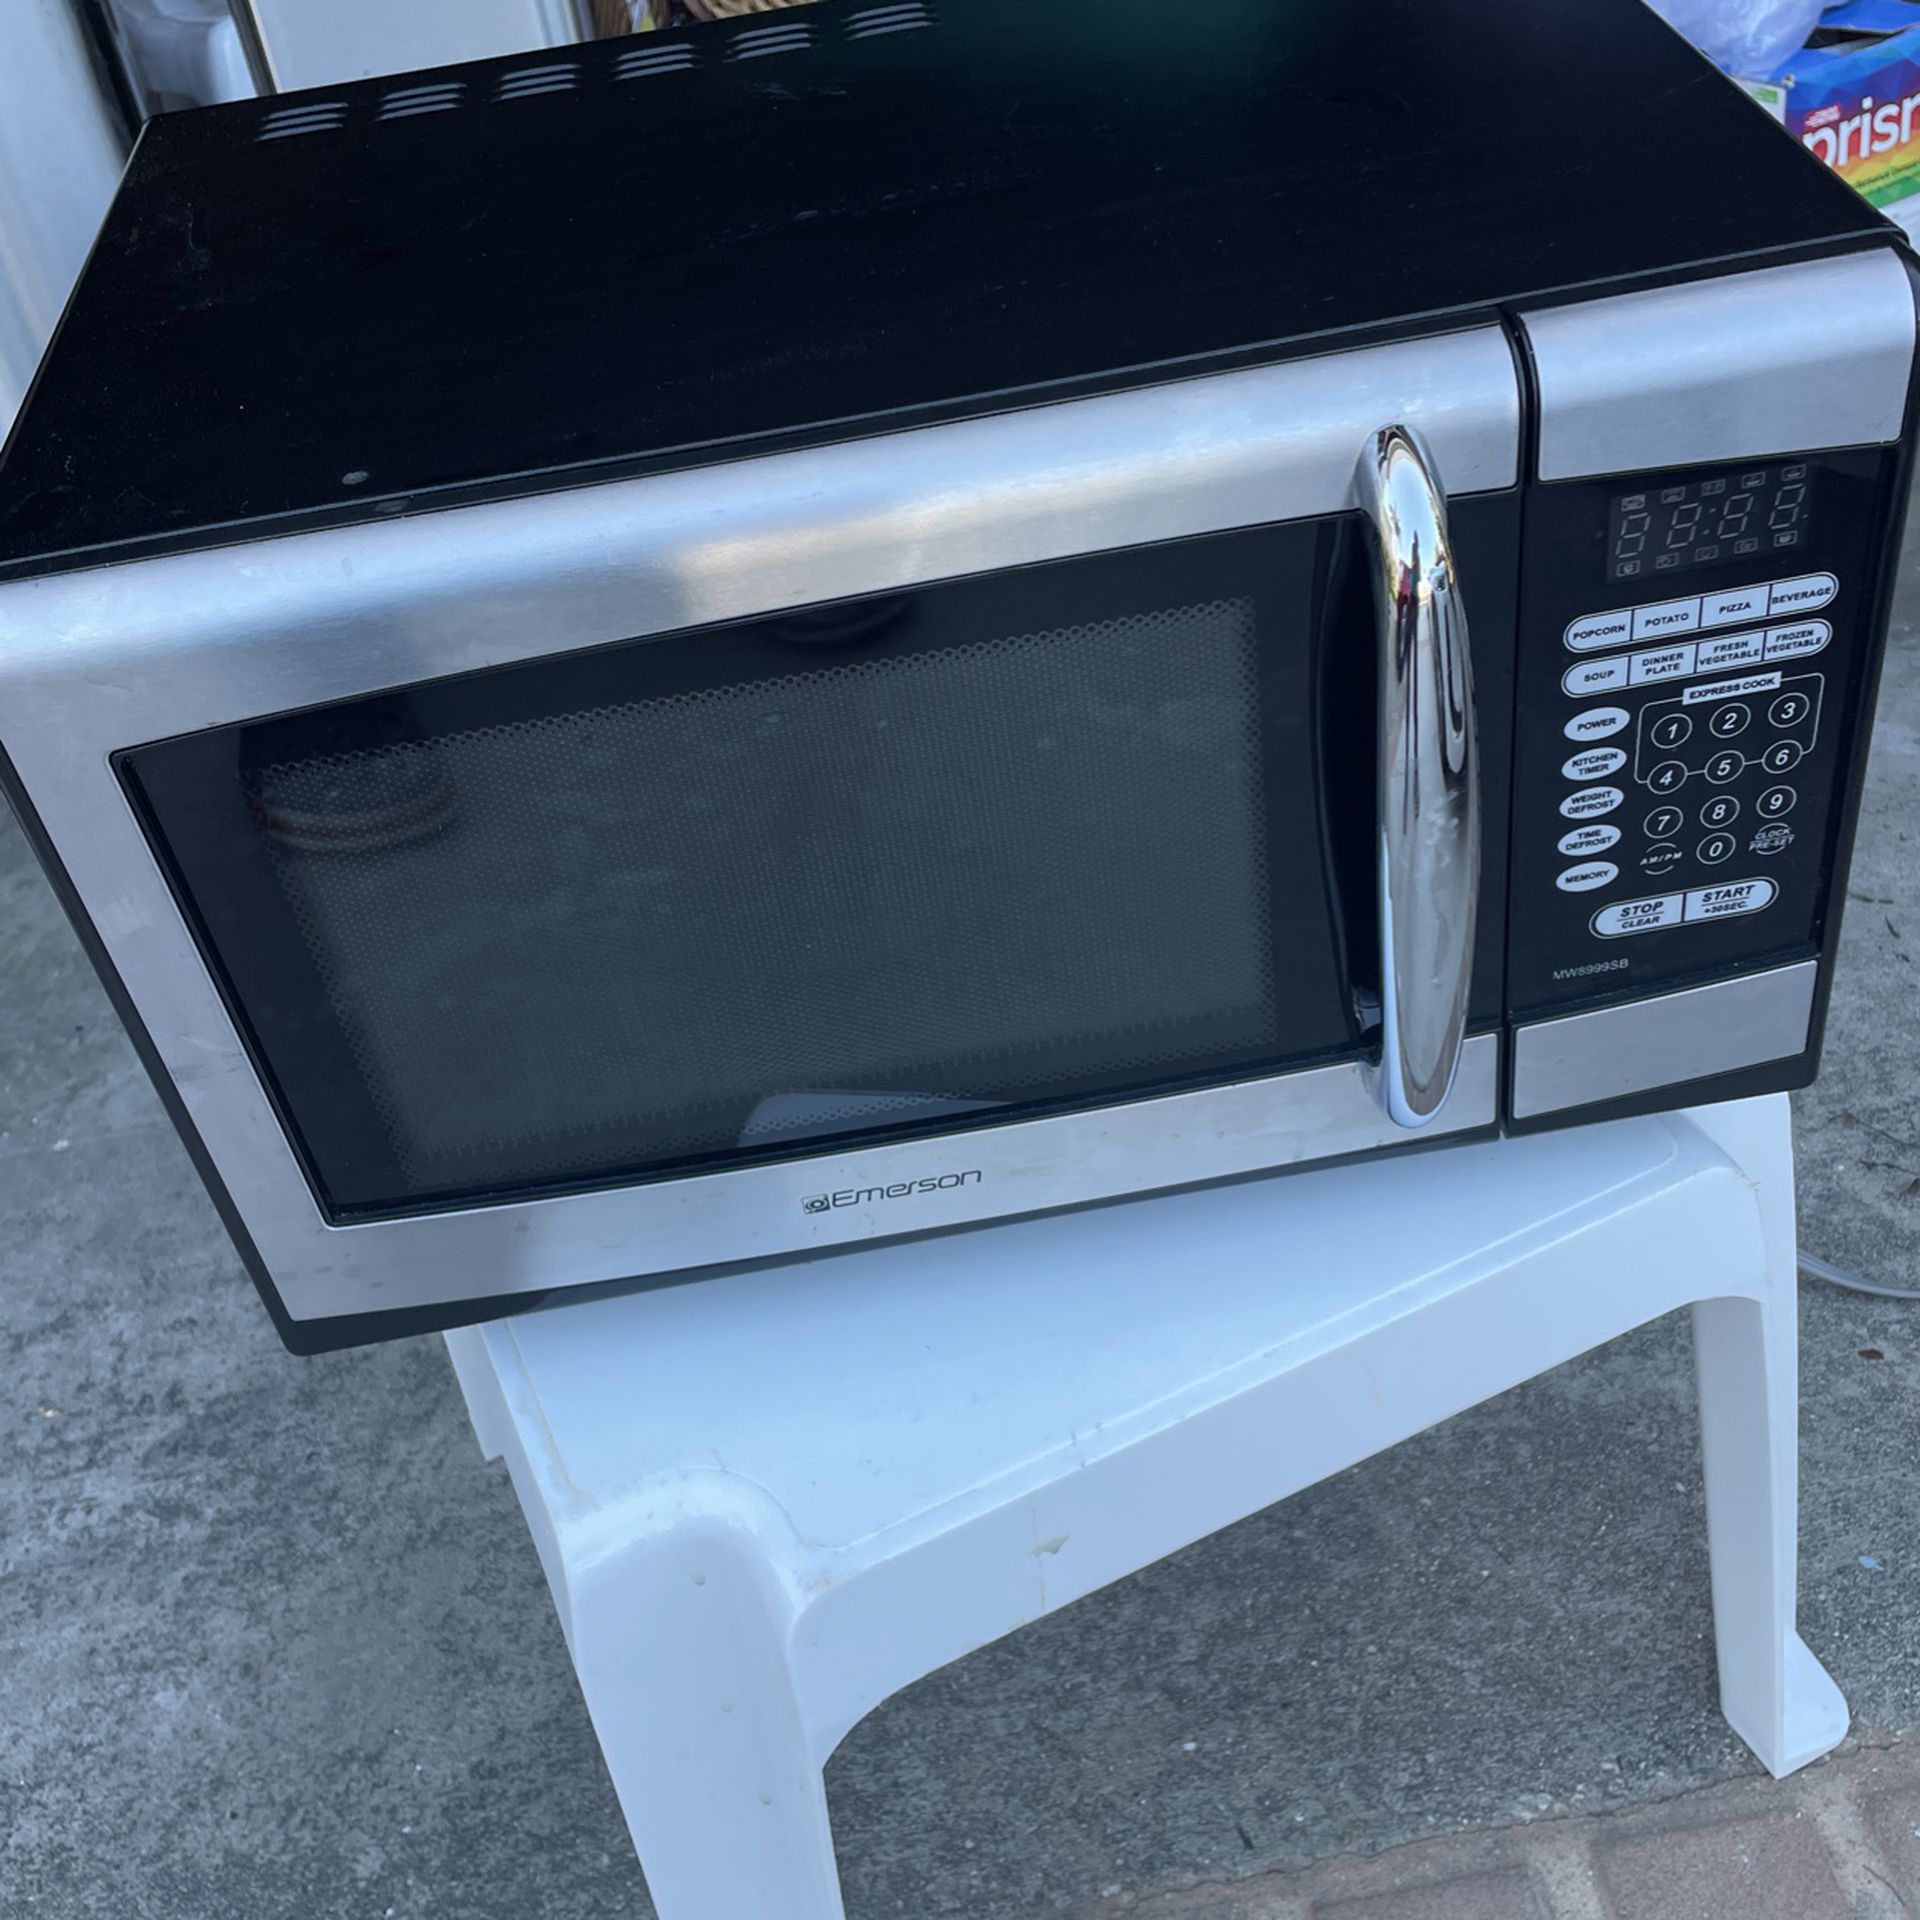 Micro Waves Oven